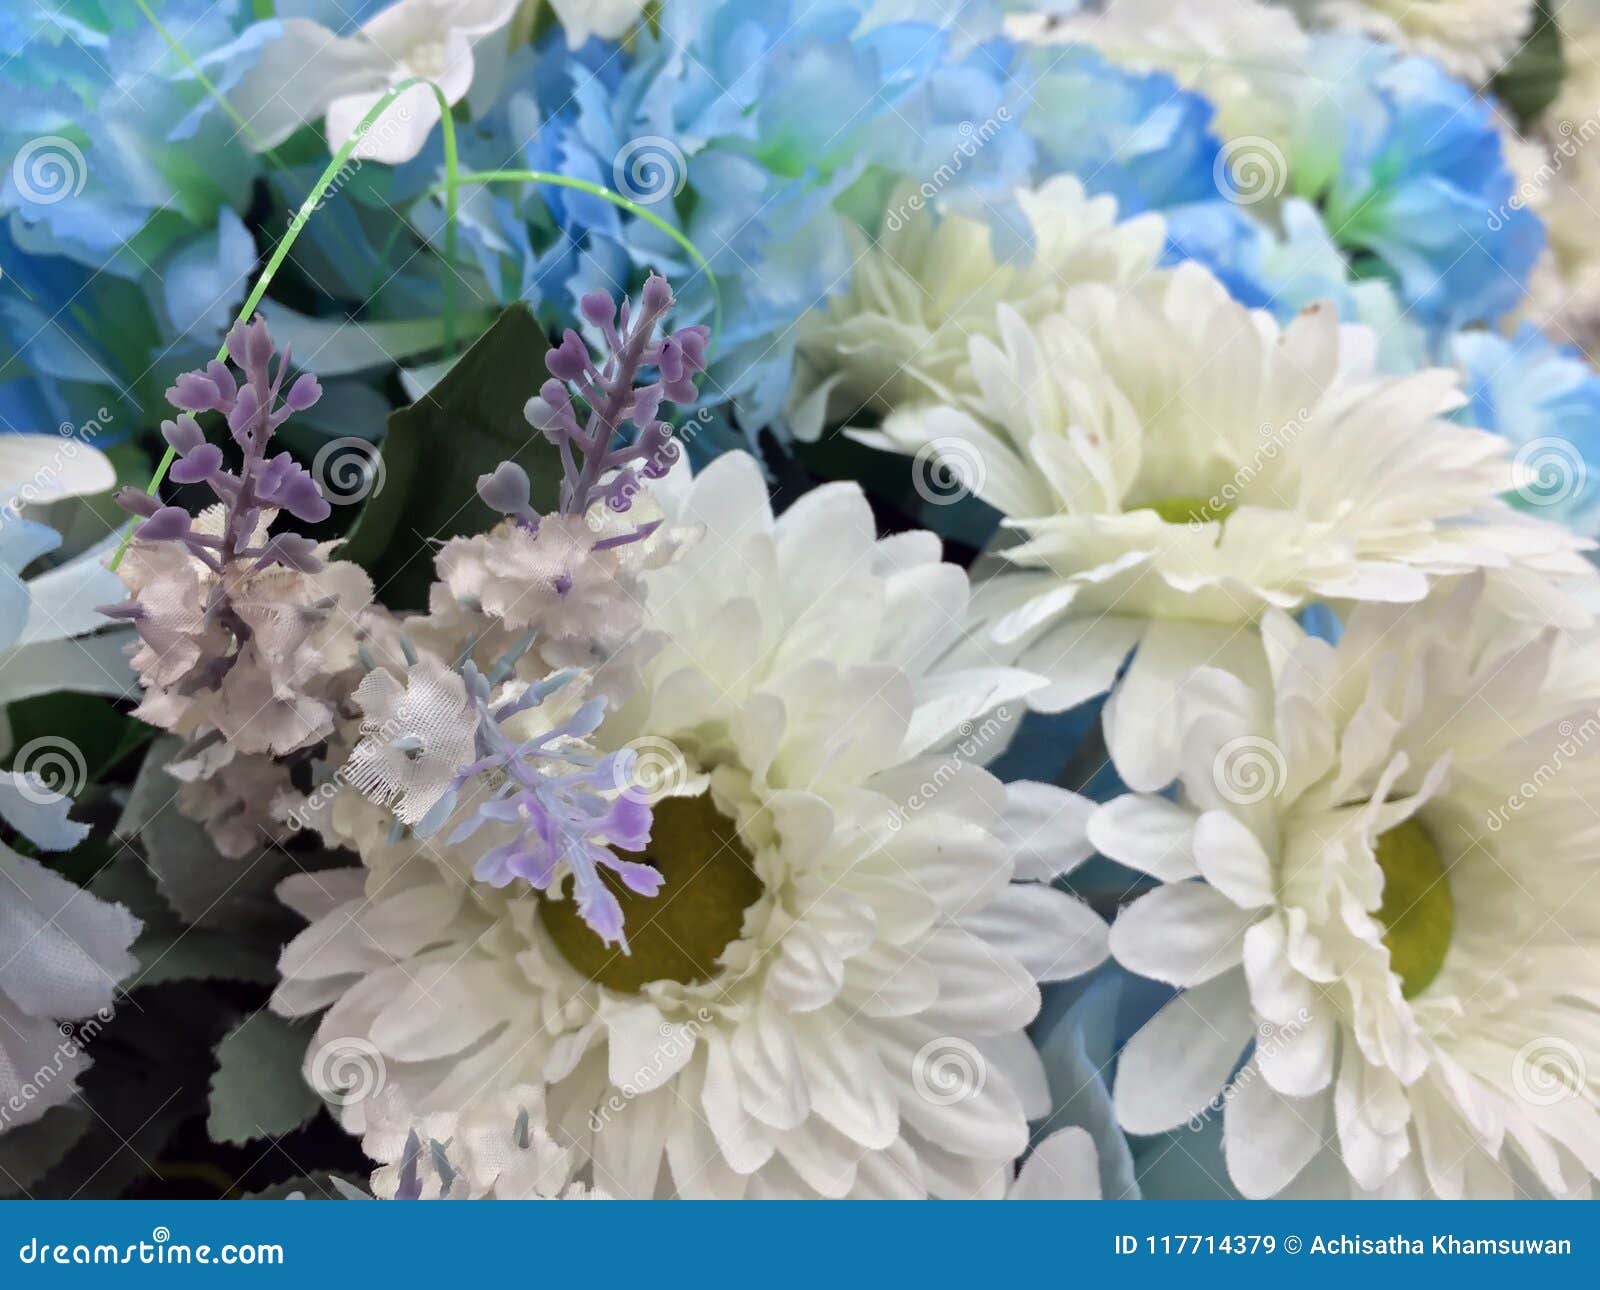 White and Light Blue Color of Flower Bouquet, All of it Made from ...